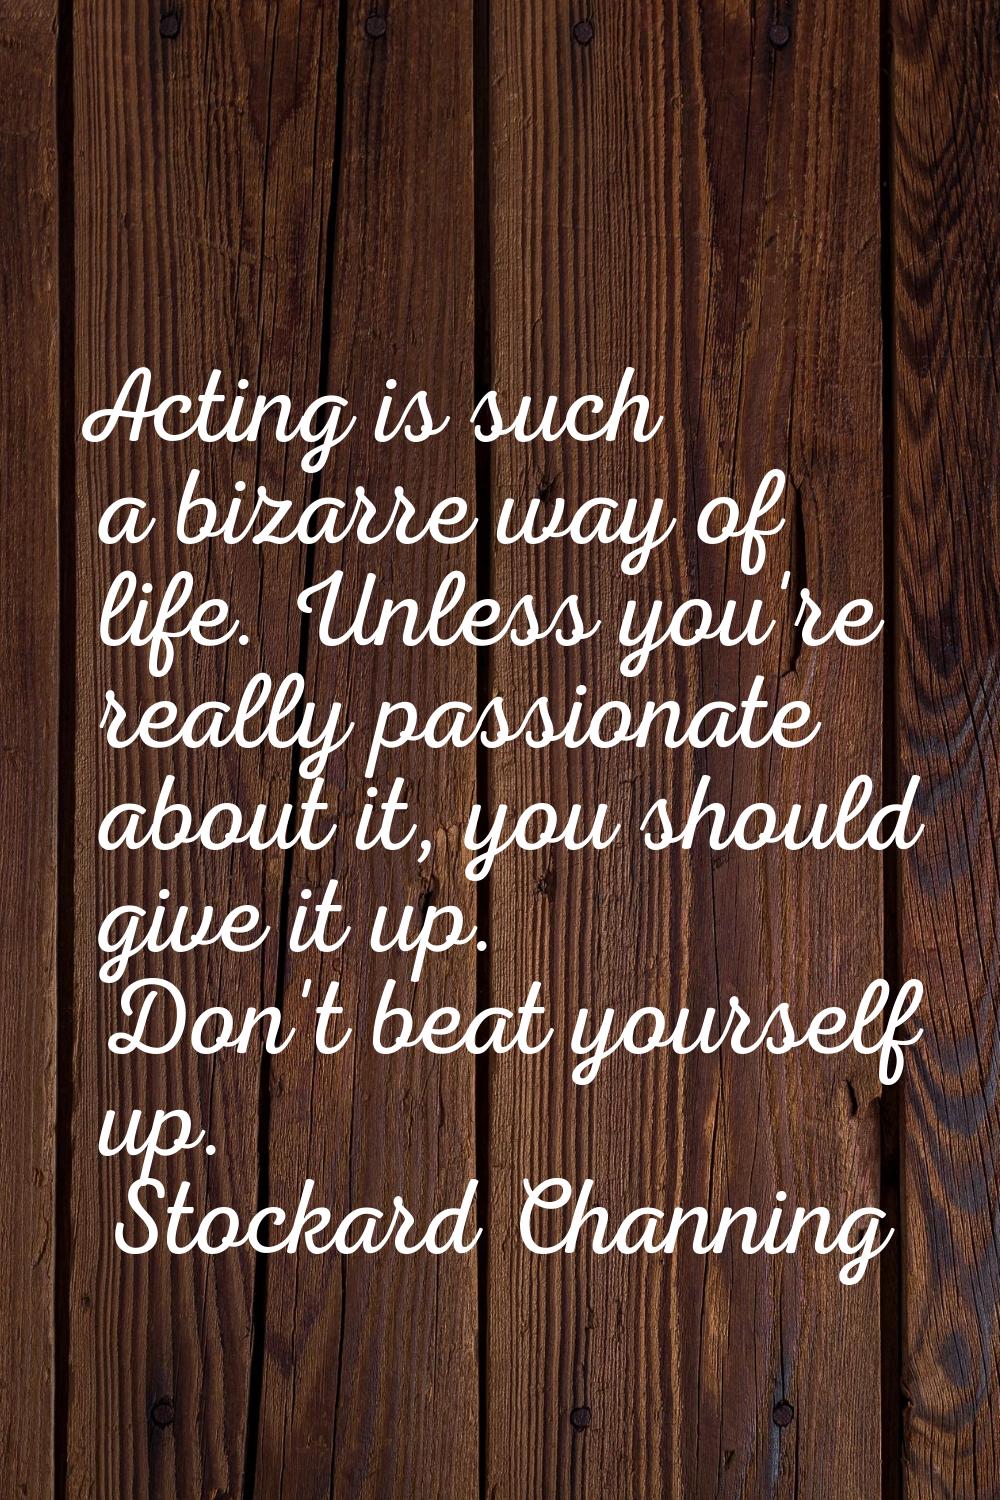 Acting is such a bizarre way of life. Unless you're really passionate about it, you should give it 